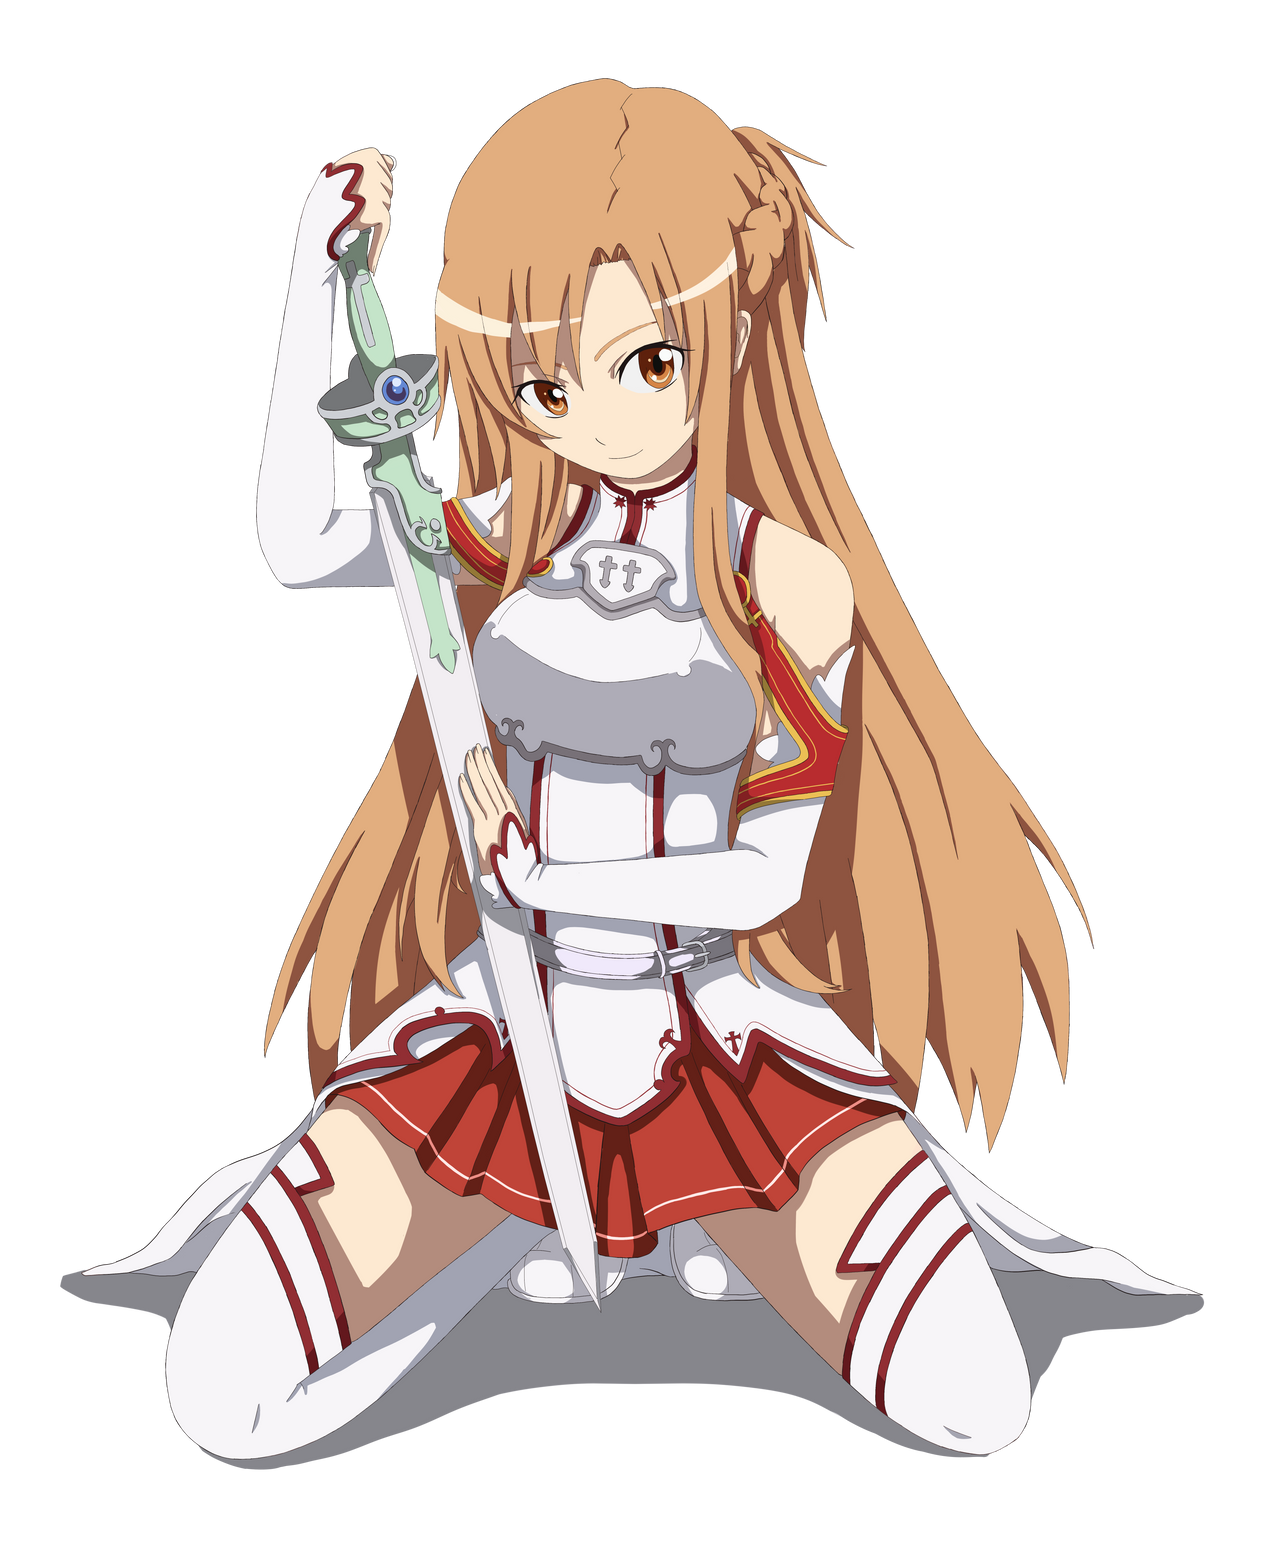 Maid of the Day — Today's Maid of the Day: Yuuki Asuna from Sword